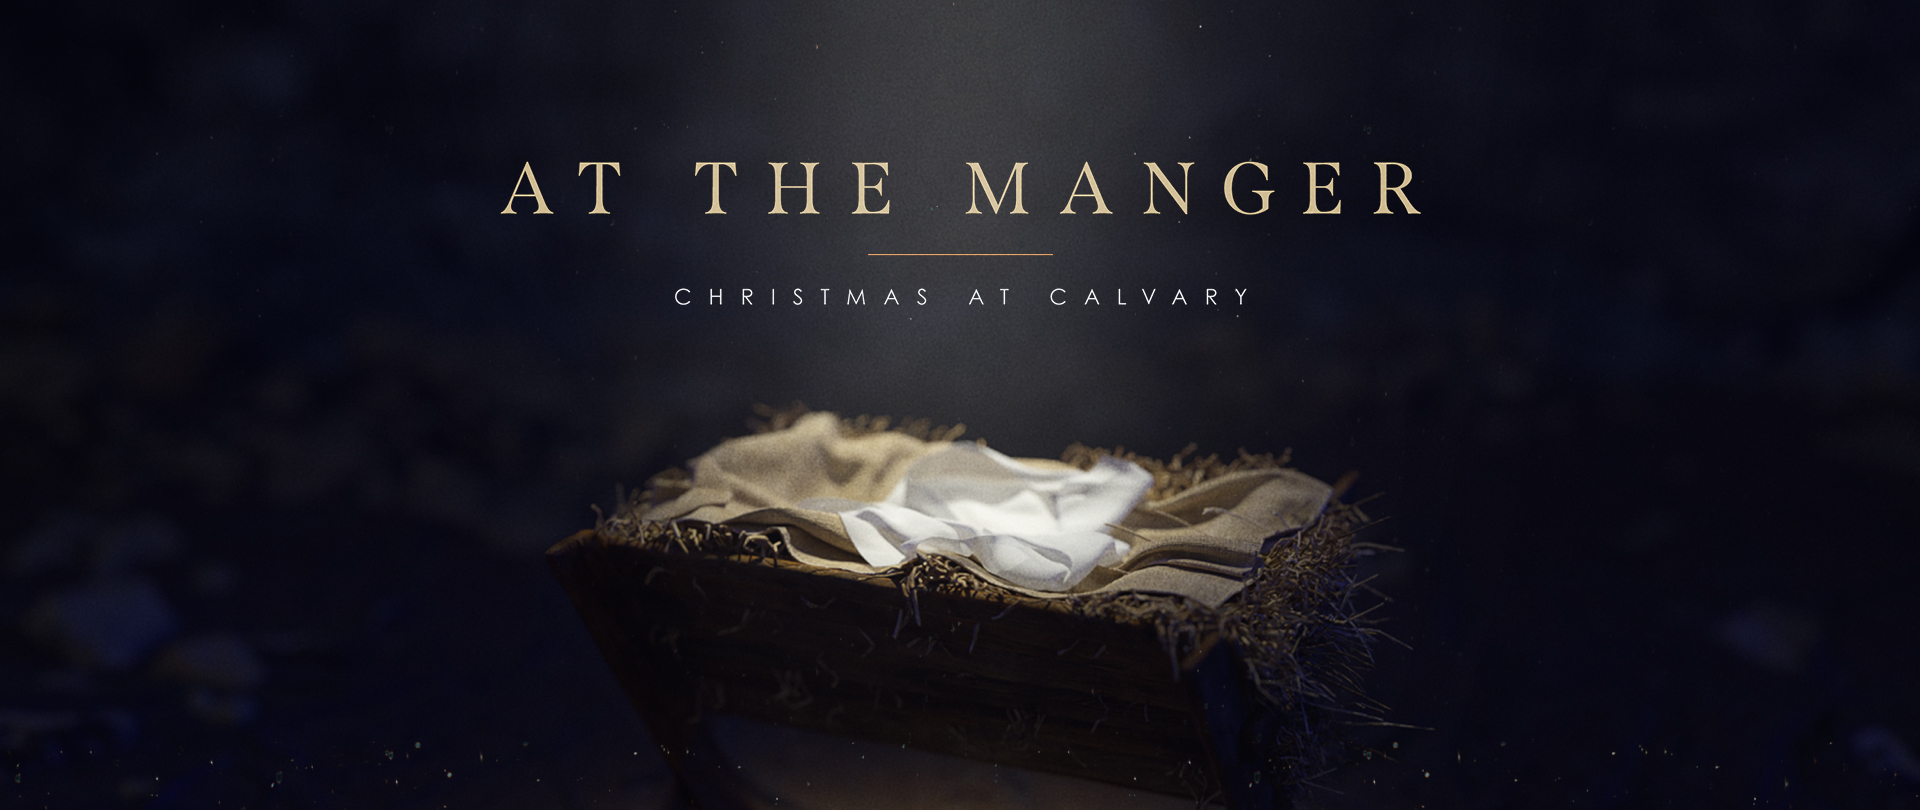 "At the Manger"
Christmas Series
Sundays at 9:45 AM
Join us for worship!
